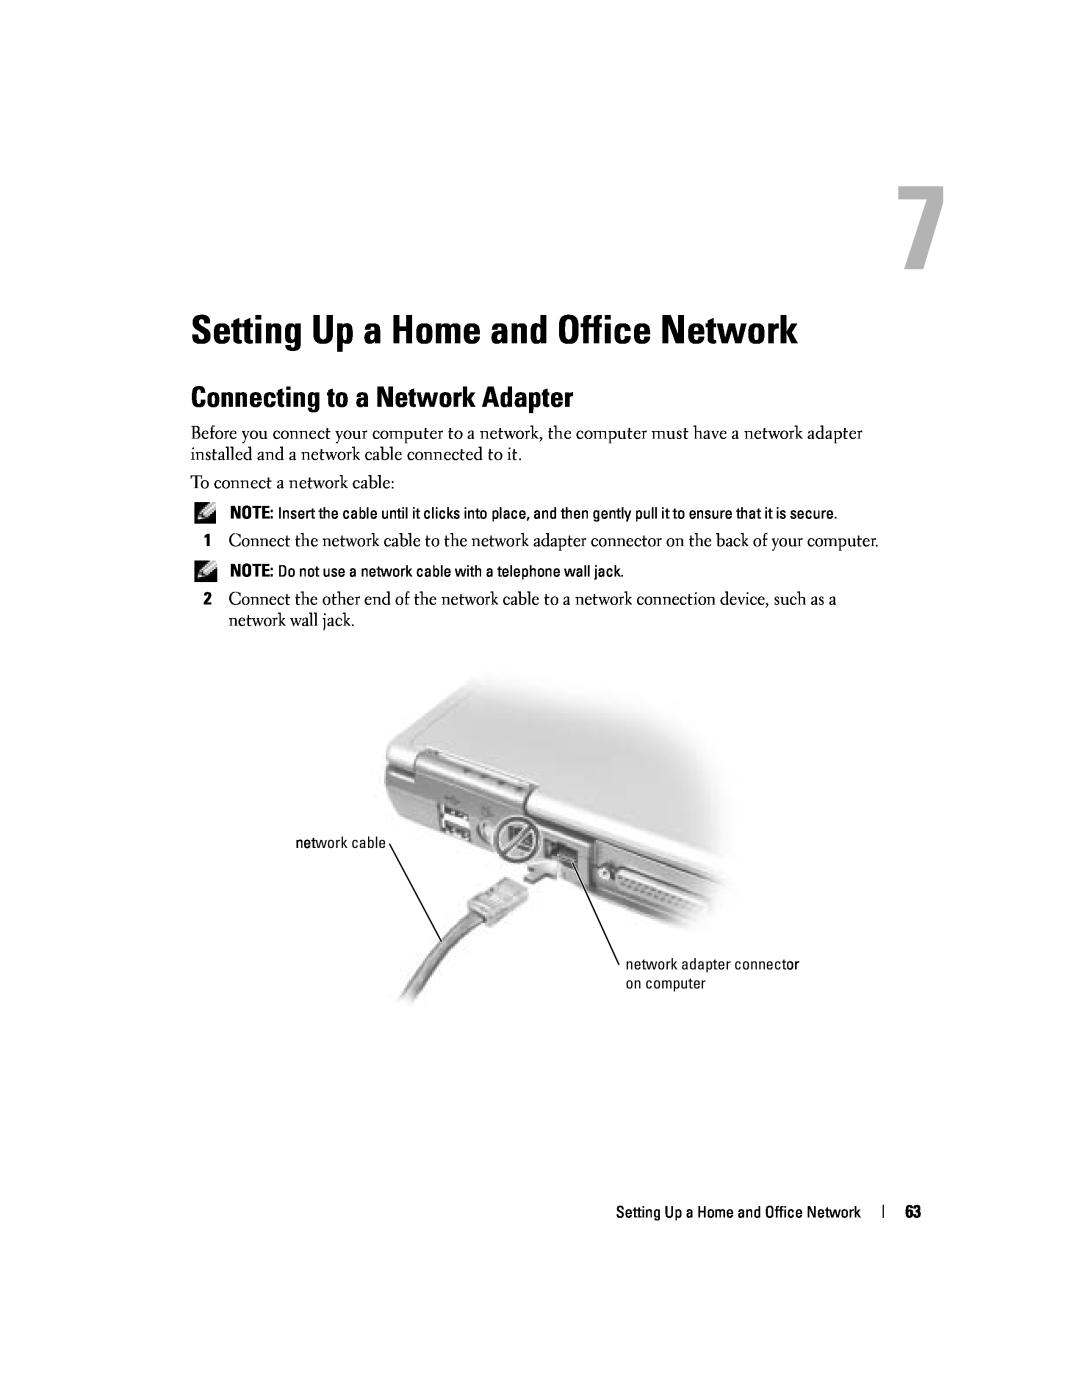 Dell PP10L owner manual Setting Up a Home and Office Network, Connecting to a Network Adapter 